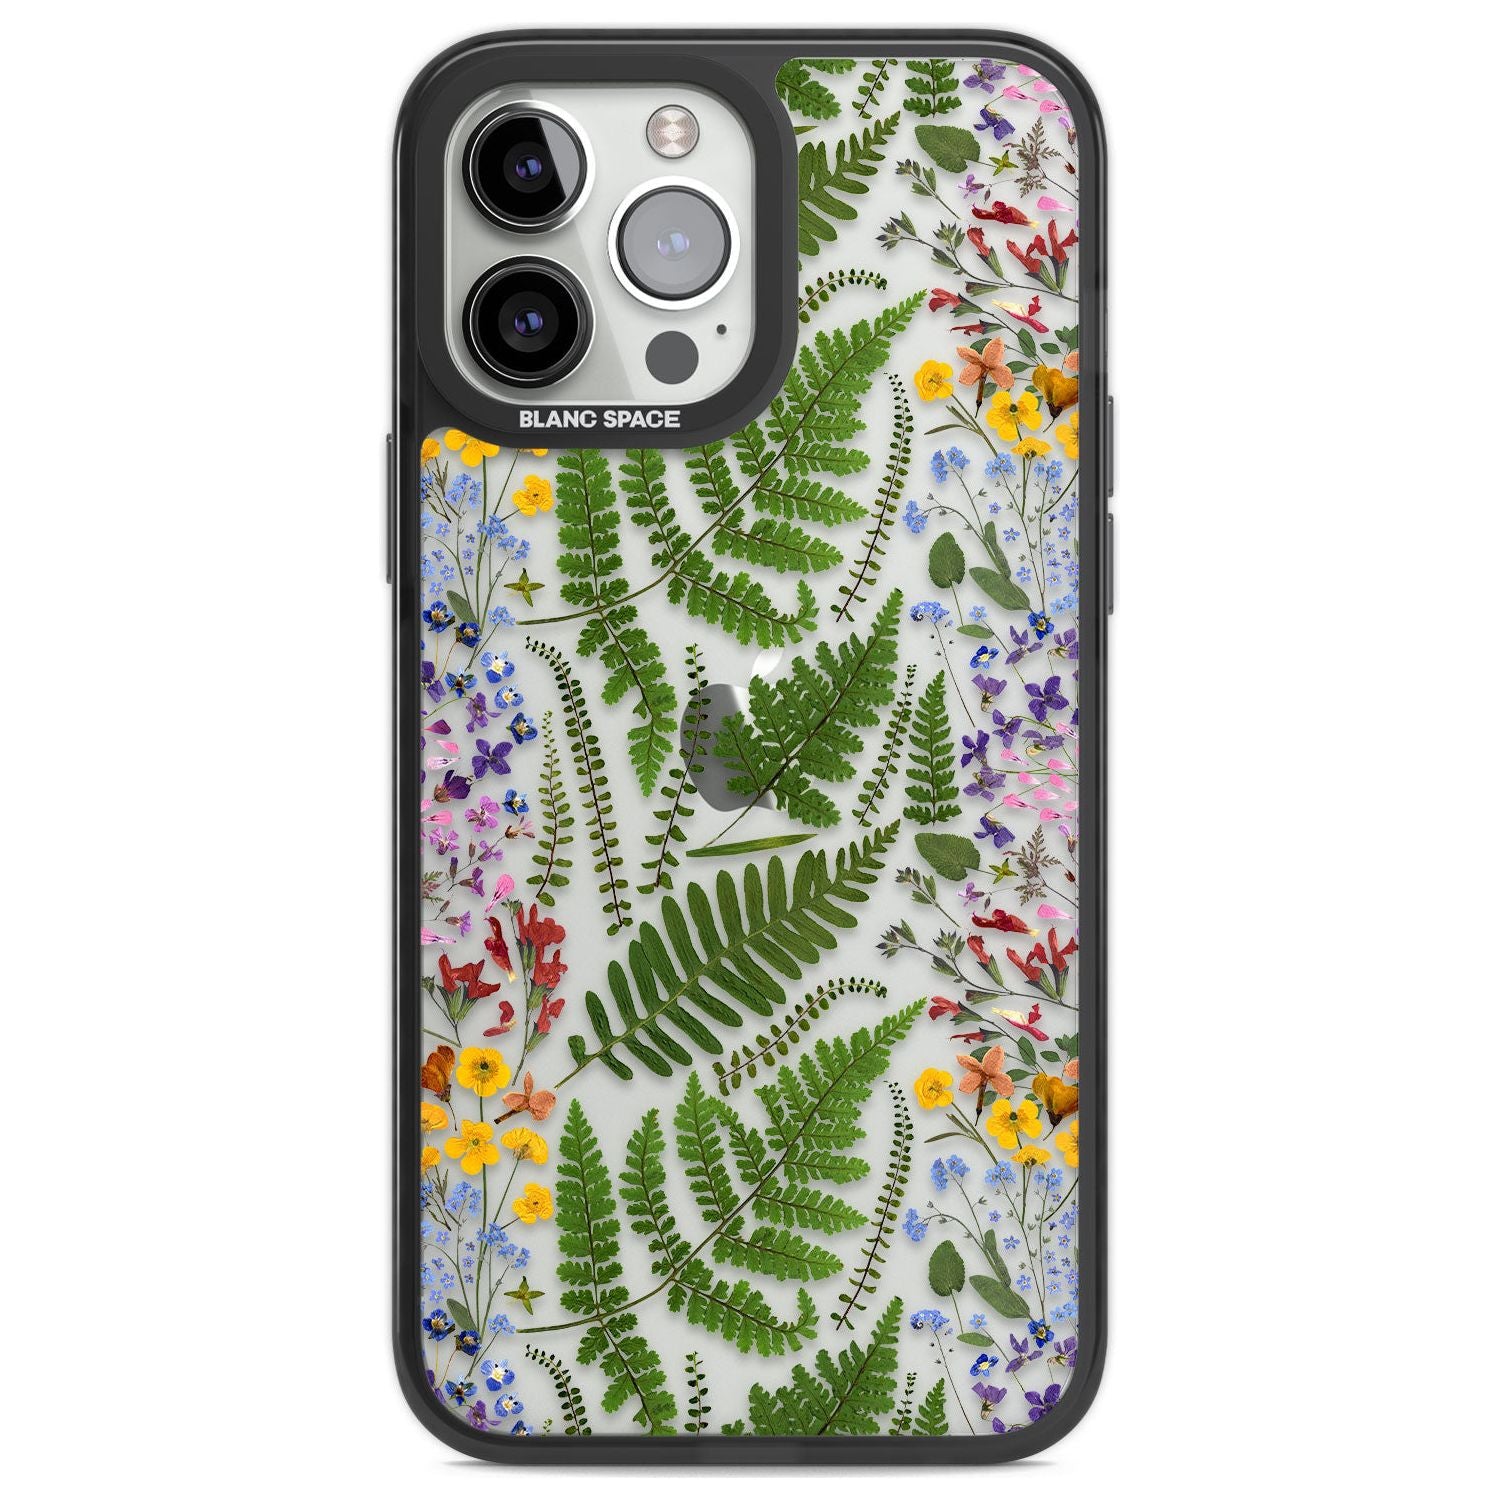 Busy Floral and Fern Design Phone Case iPhone 13 Pro Max / Black Impact Case,iPhone 14 Pro Max / Black Impact Case Blanc Space